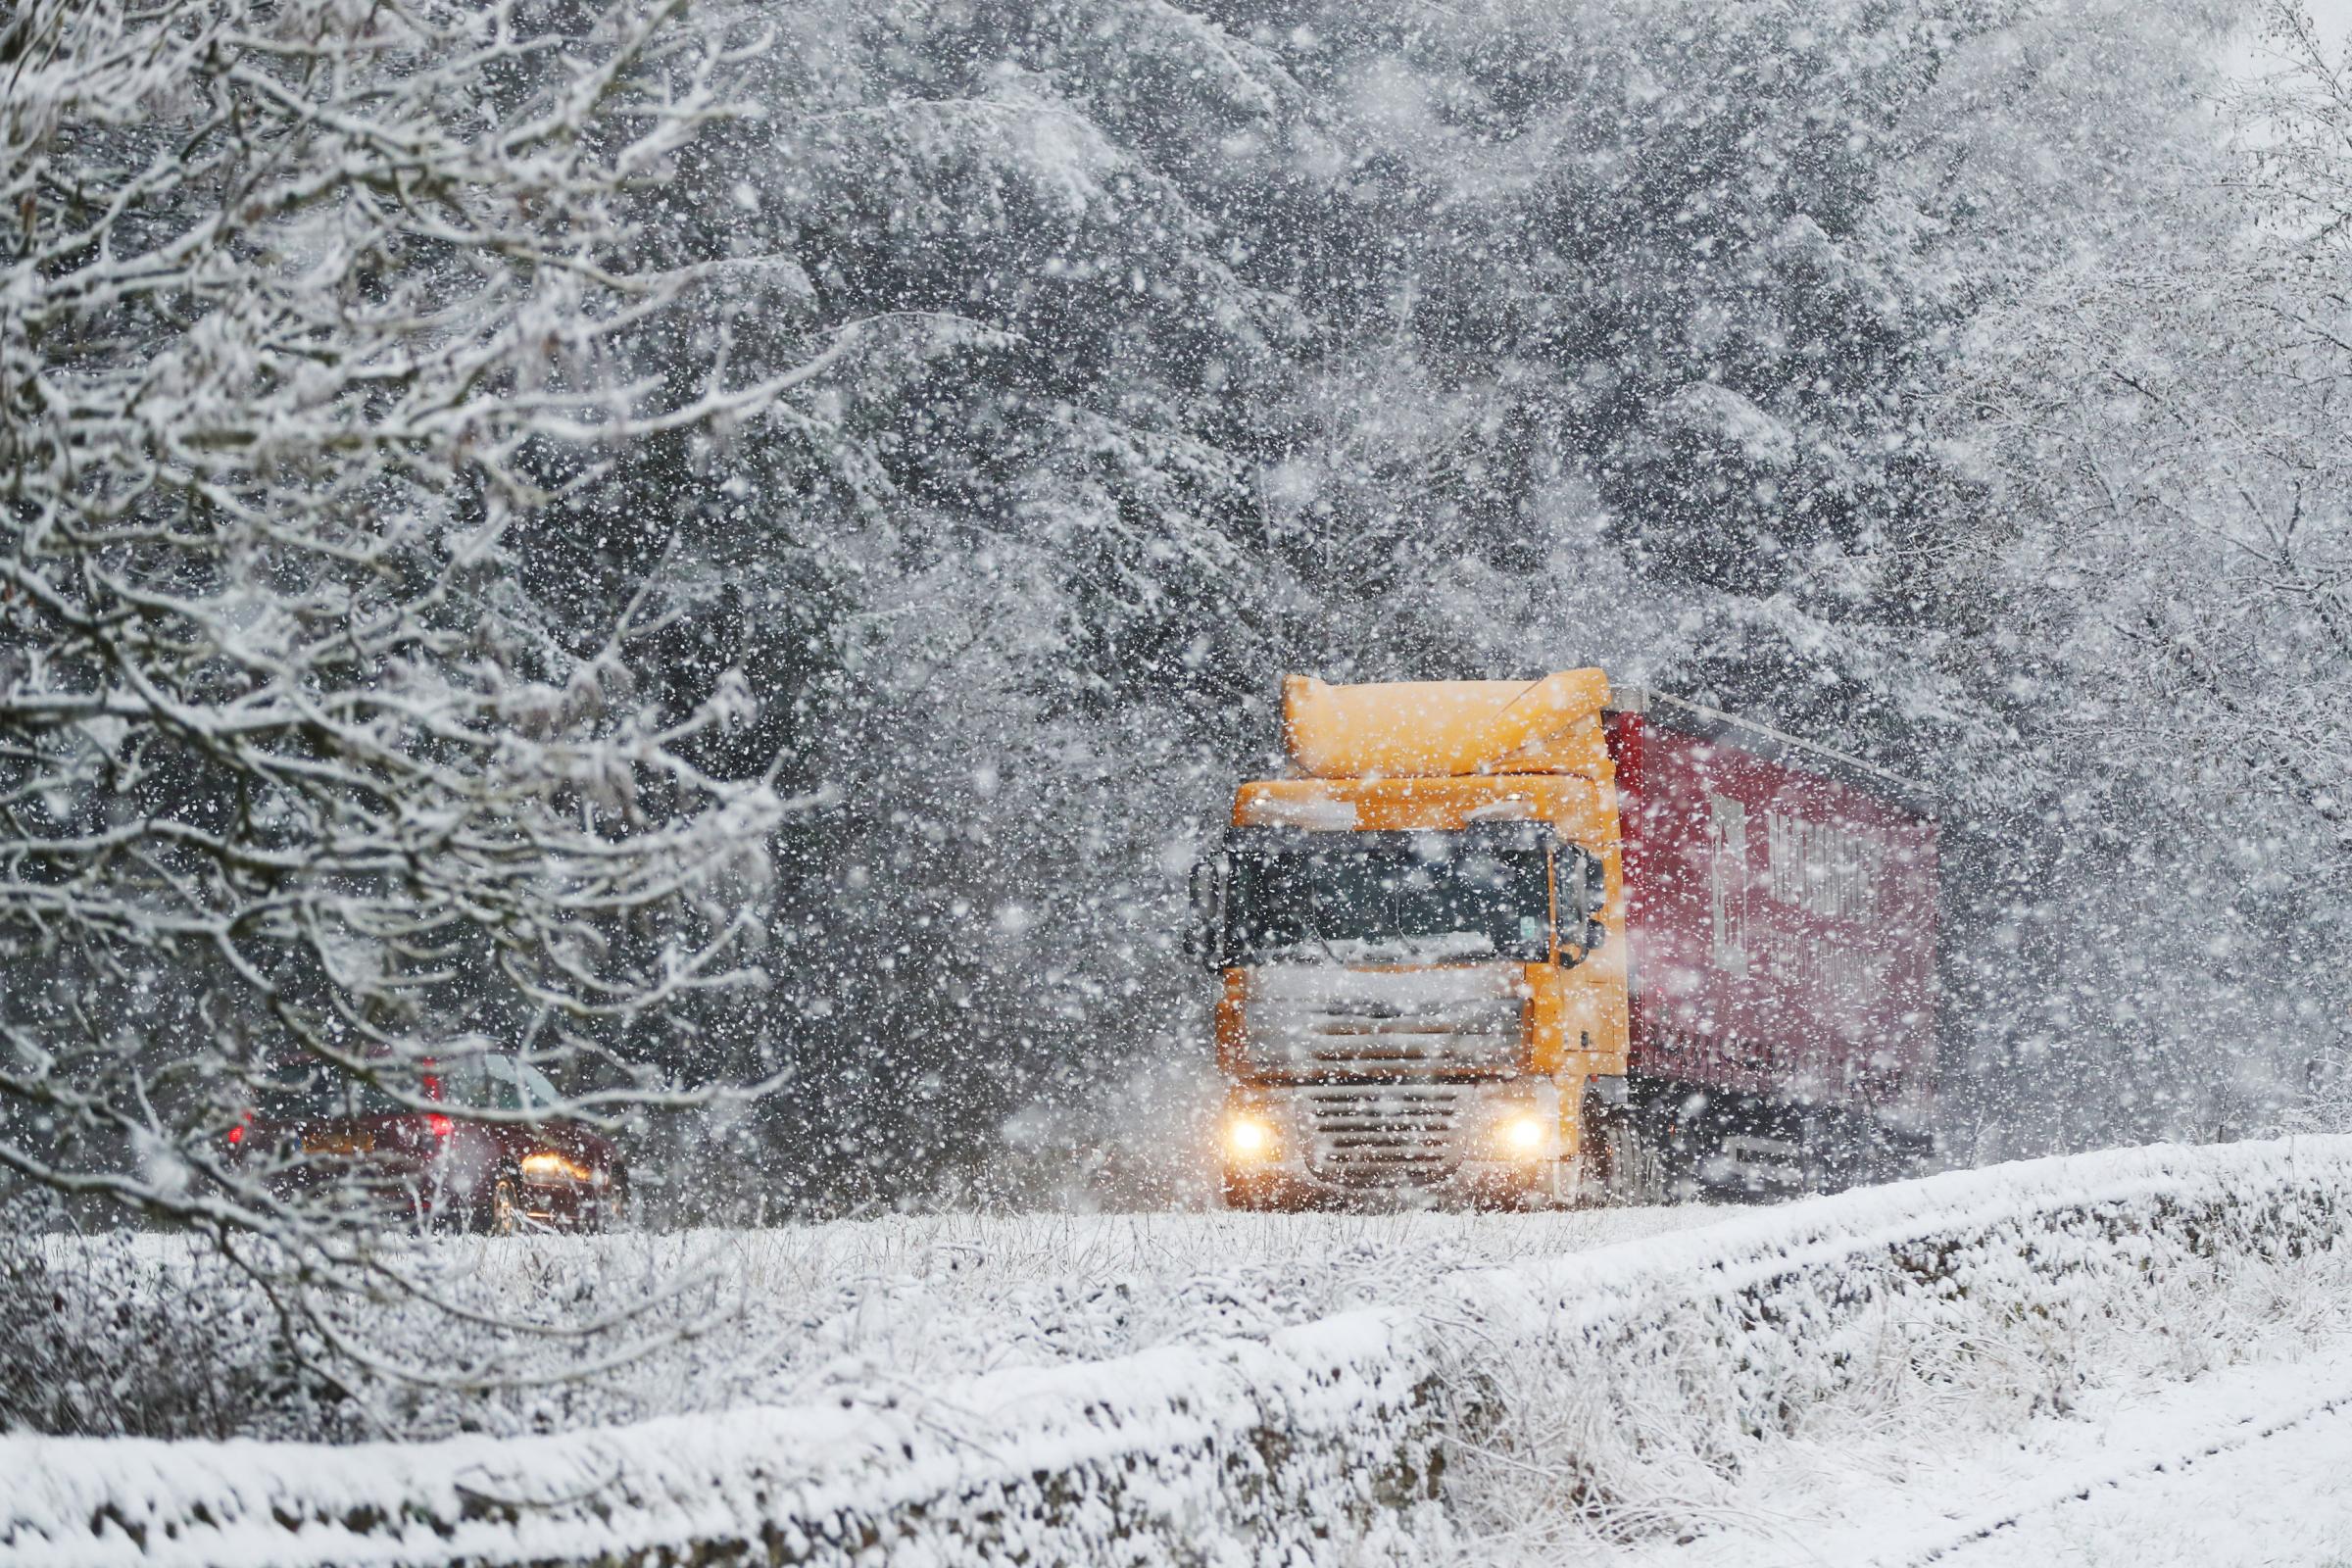 Your Pictures: Heavy snowfall hits region causing disruption on roads